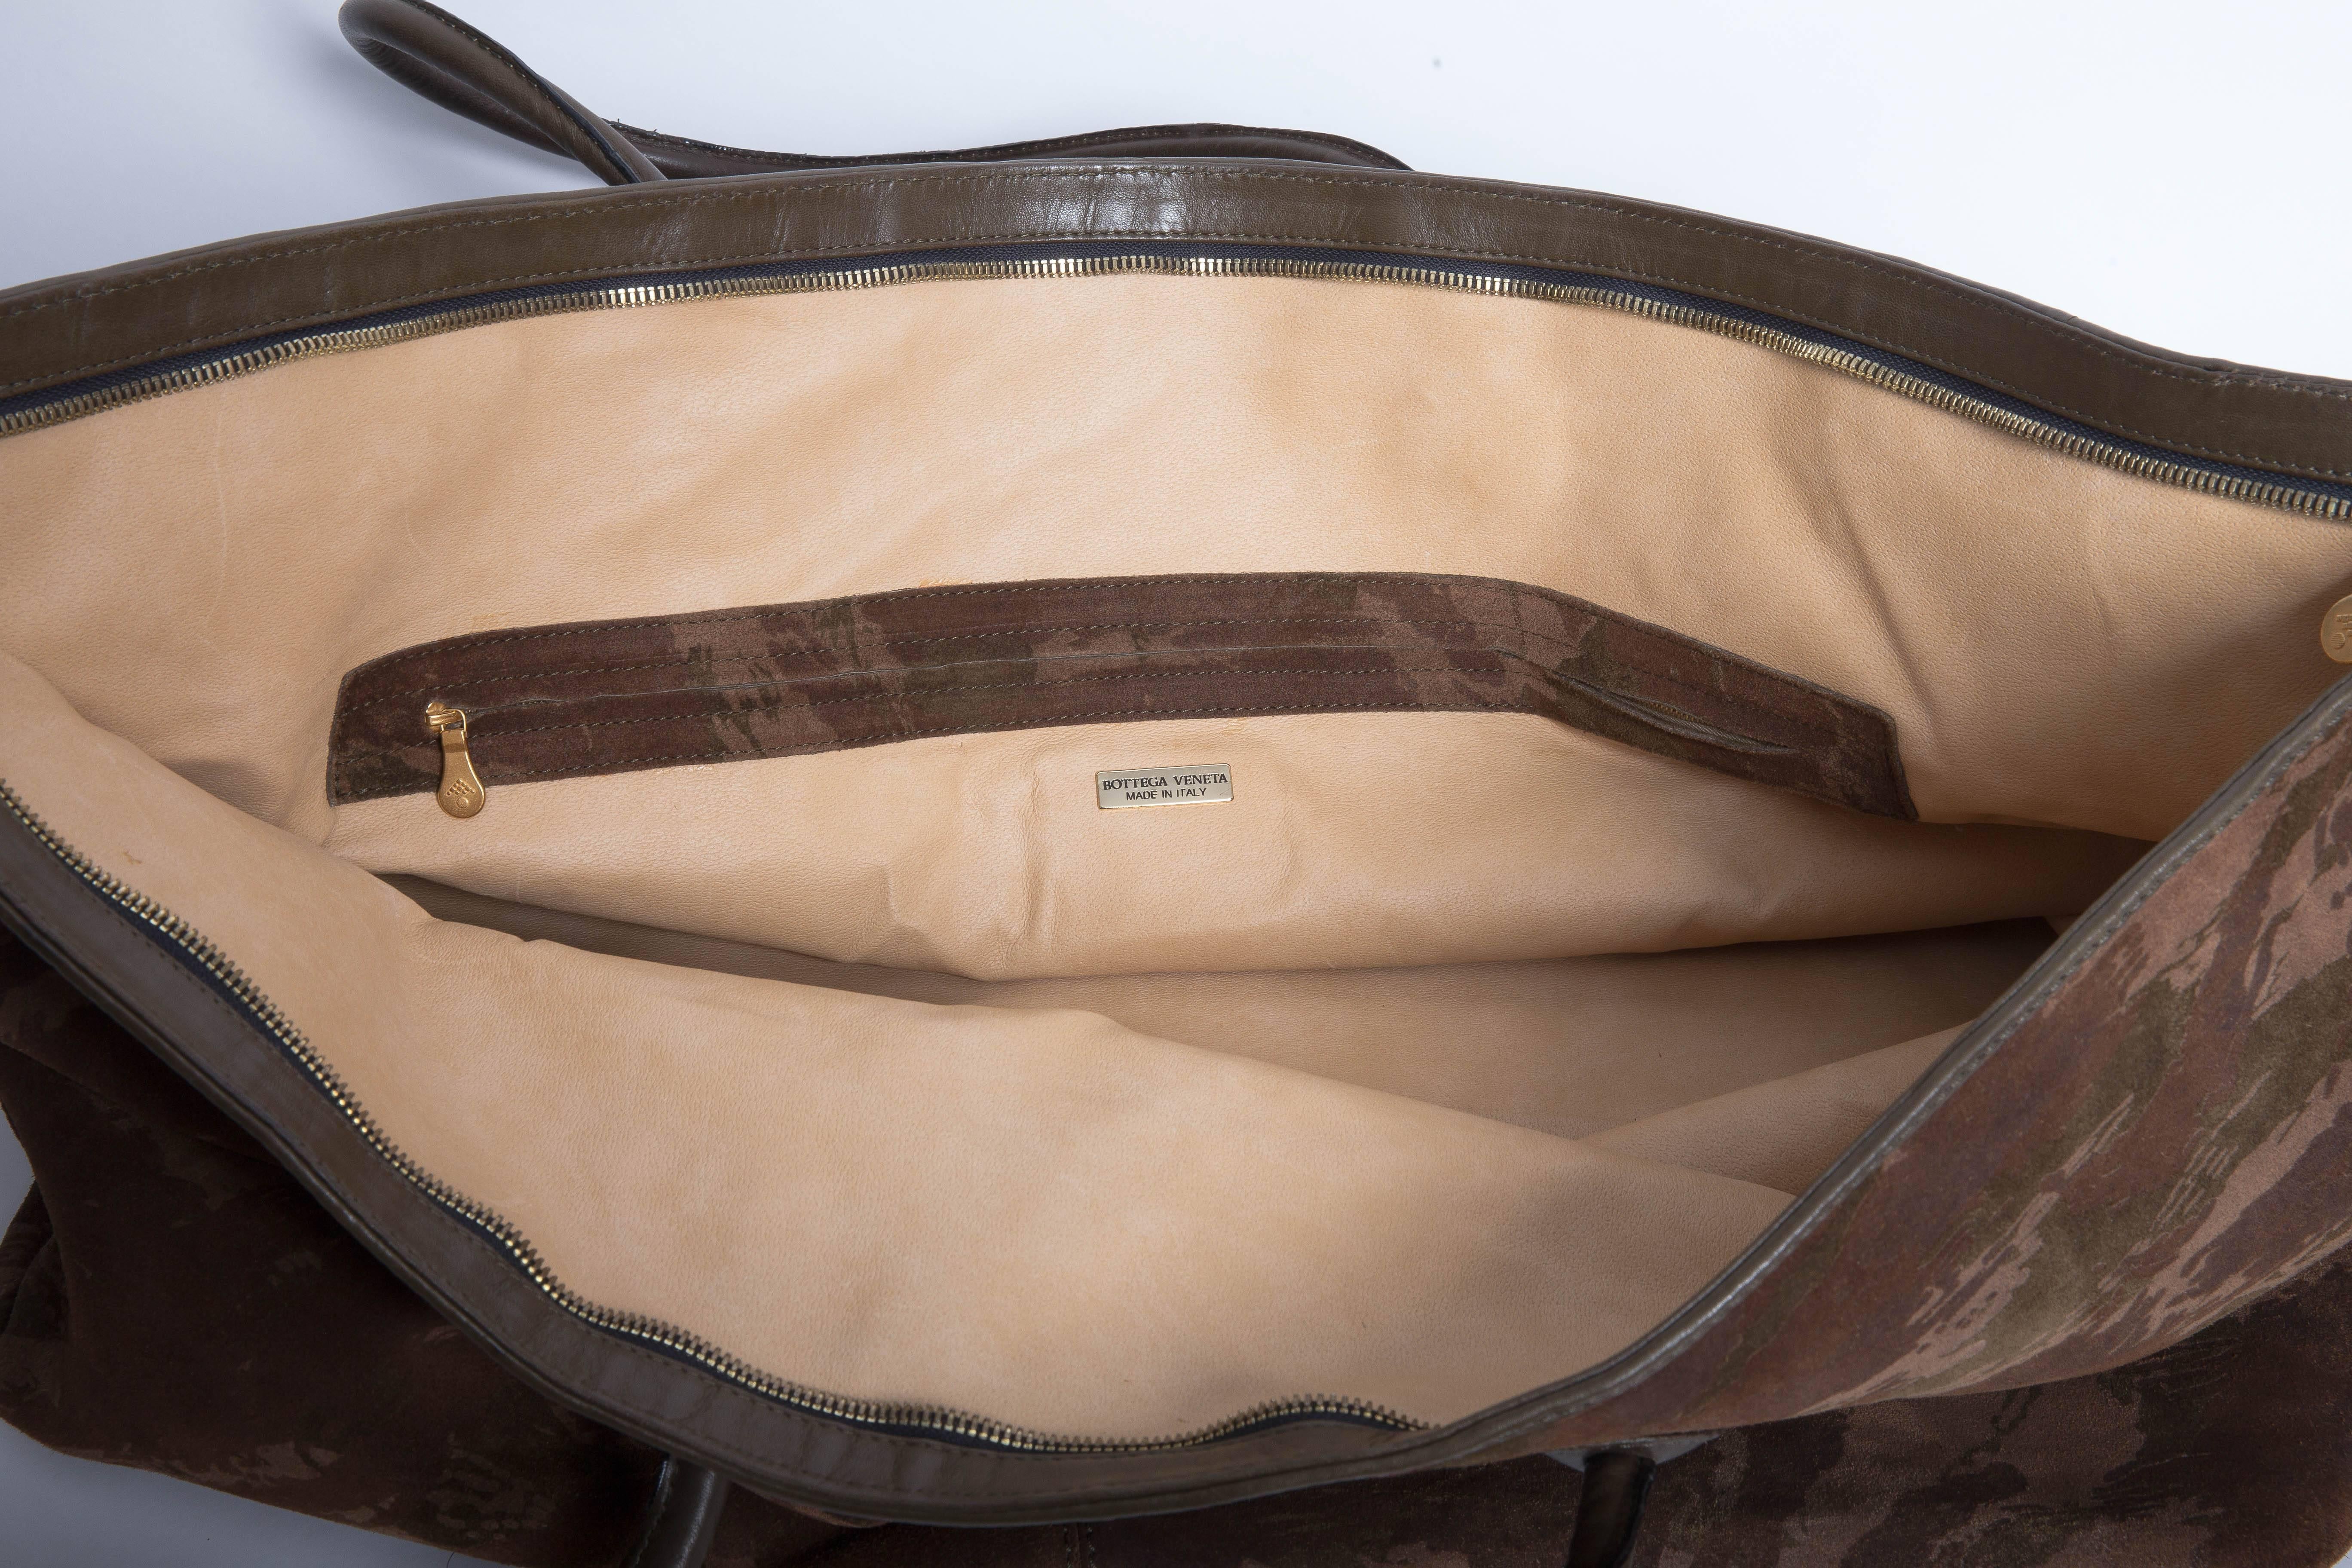 Bottega Veneta Camouflage Suede Duffle Bag In Excellent Condition For Sale In Westhampton Beach, NY